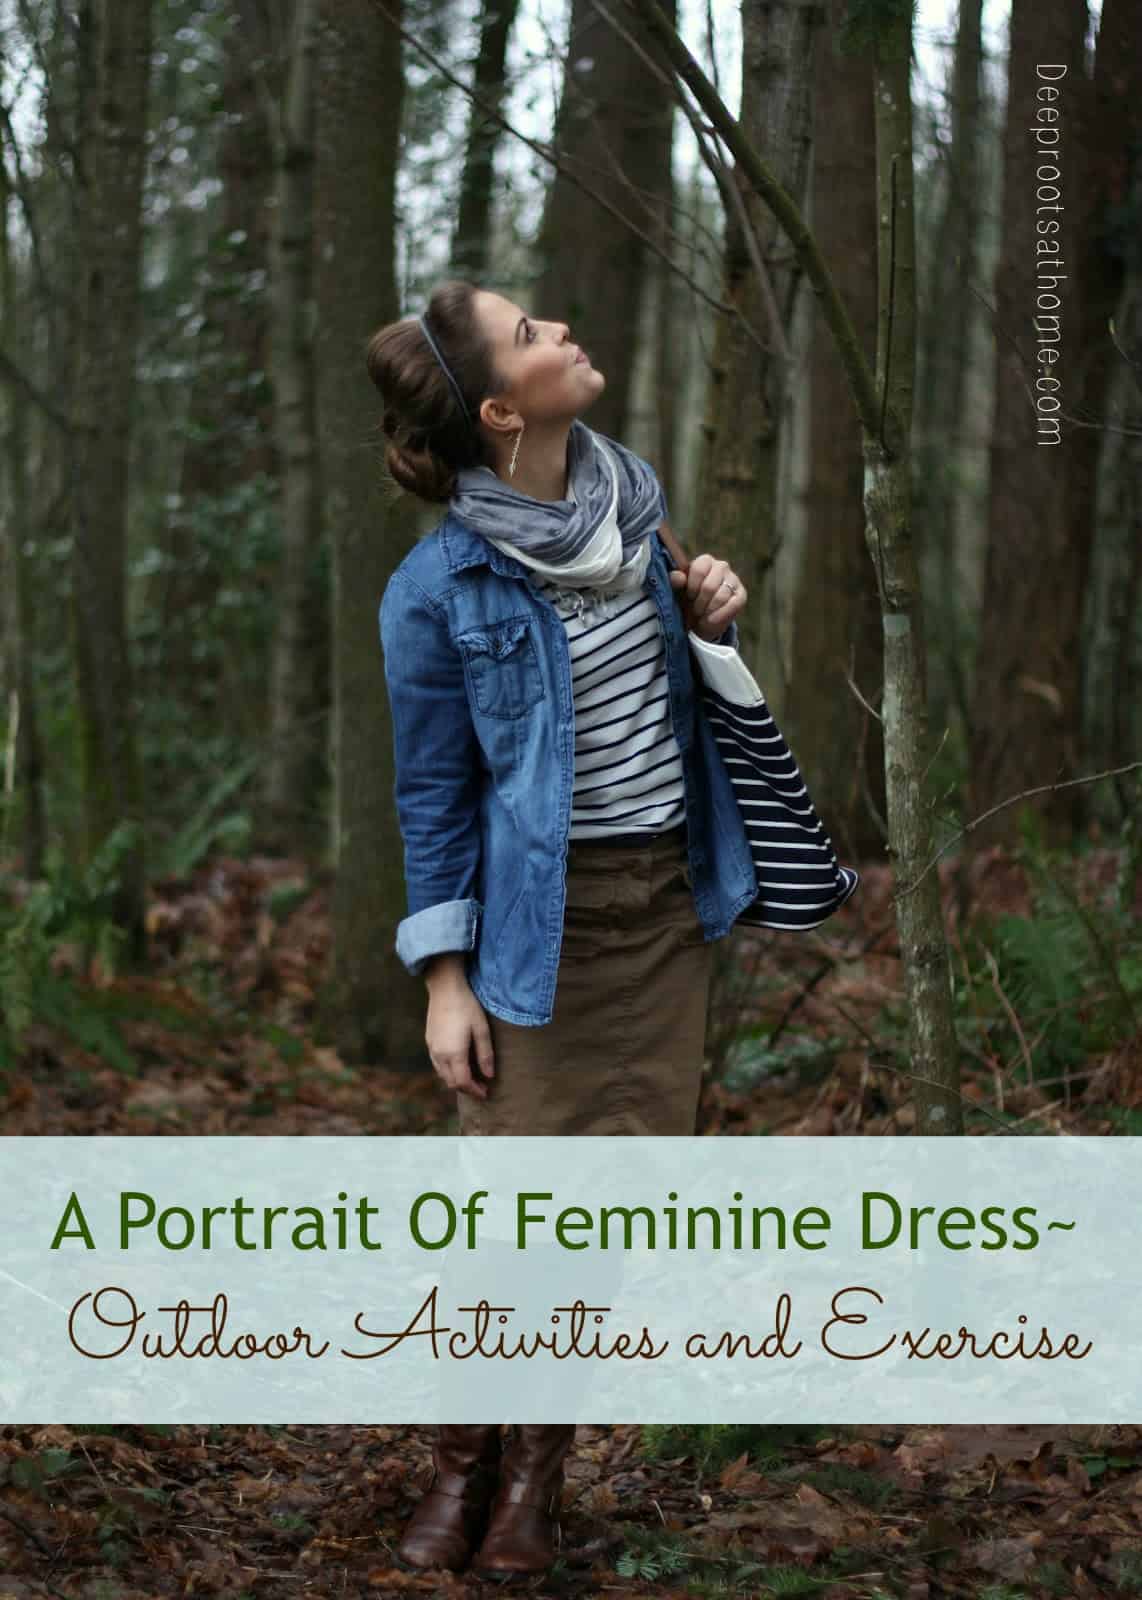 A Portrait Of Feminine Dress, Part 3 ~ Outdoor Activities and Exercise, Susan Dashwood, Verity Hope dress, Kitty pinafore, horse riding in skirts, exercise outfits, modest, feminine, sundress, beach wear, pantaloons, Christian women, Elizabeth Elliot, quote, mother and daughter, homestead, swimwear, homemade, homemaking, keeper at home, bicycle for two, culottes, horse riding in skirts, simpler time, athletic wear, exercise wear, active wear, Aspiring Homemaker, Marie-Madeline Studio, Hydro Chic swimwear, pretty, beautiful, 